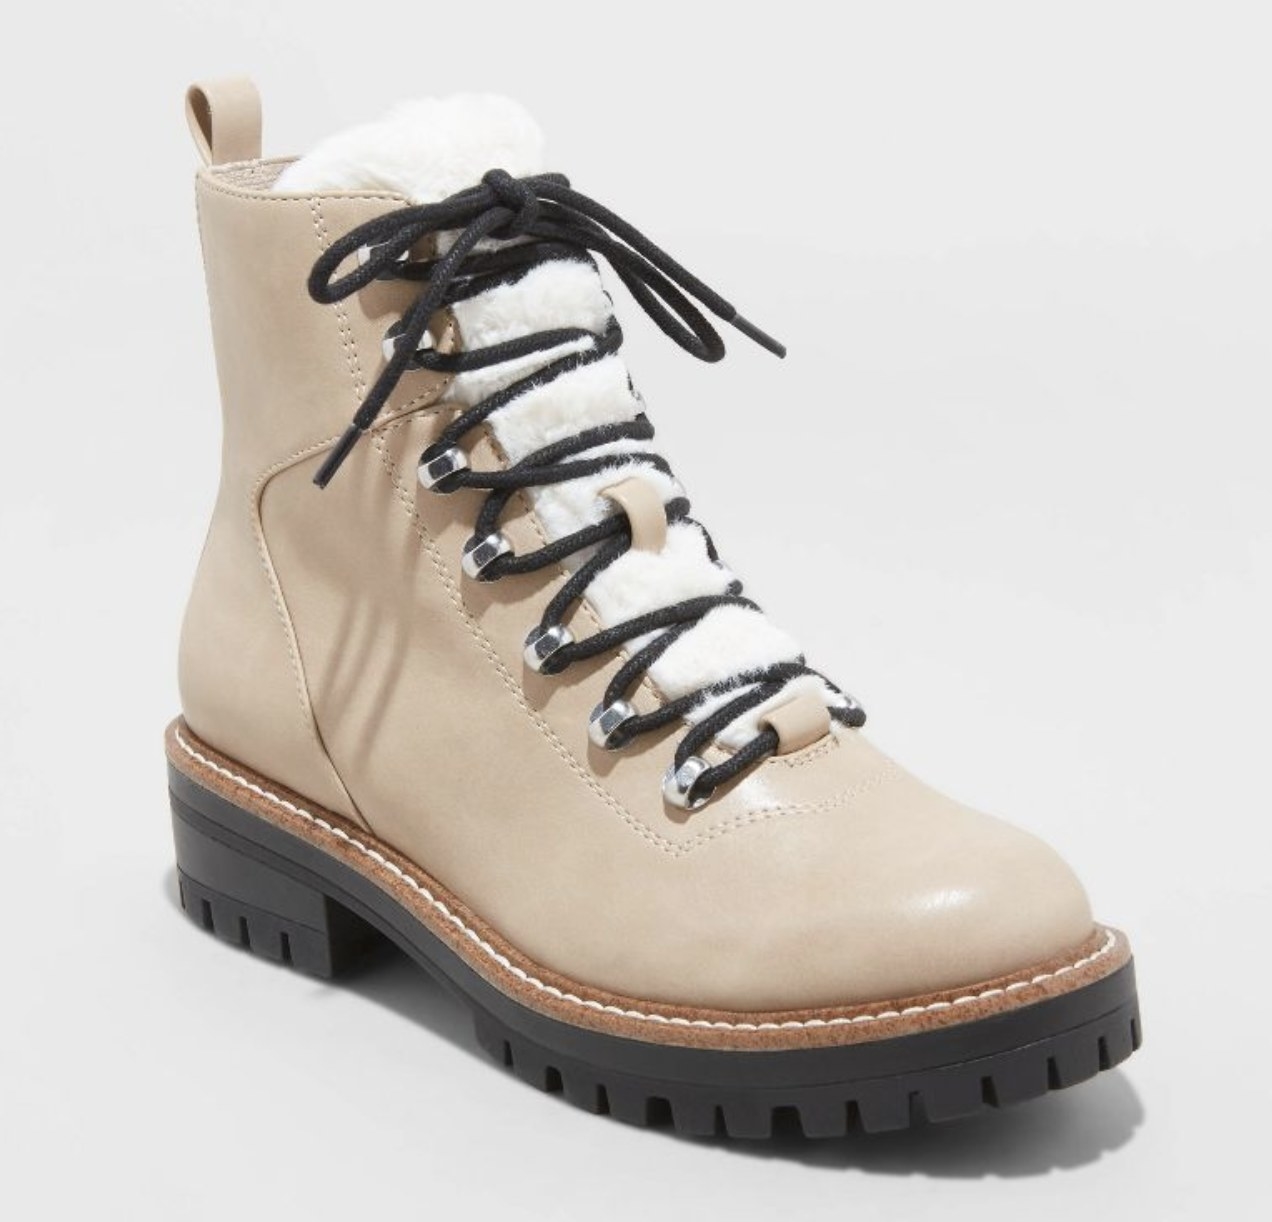 A pair of tan hiking boots